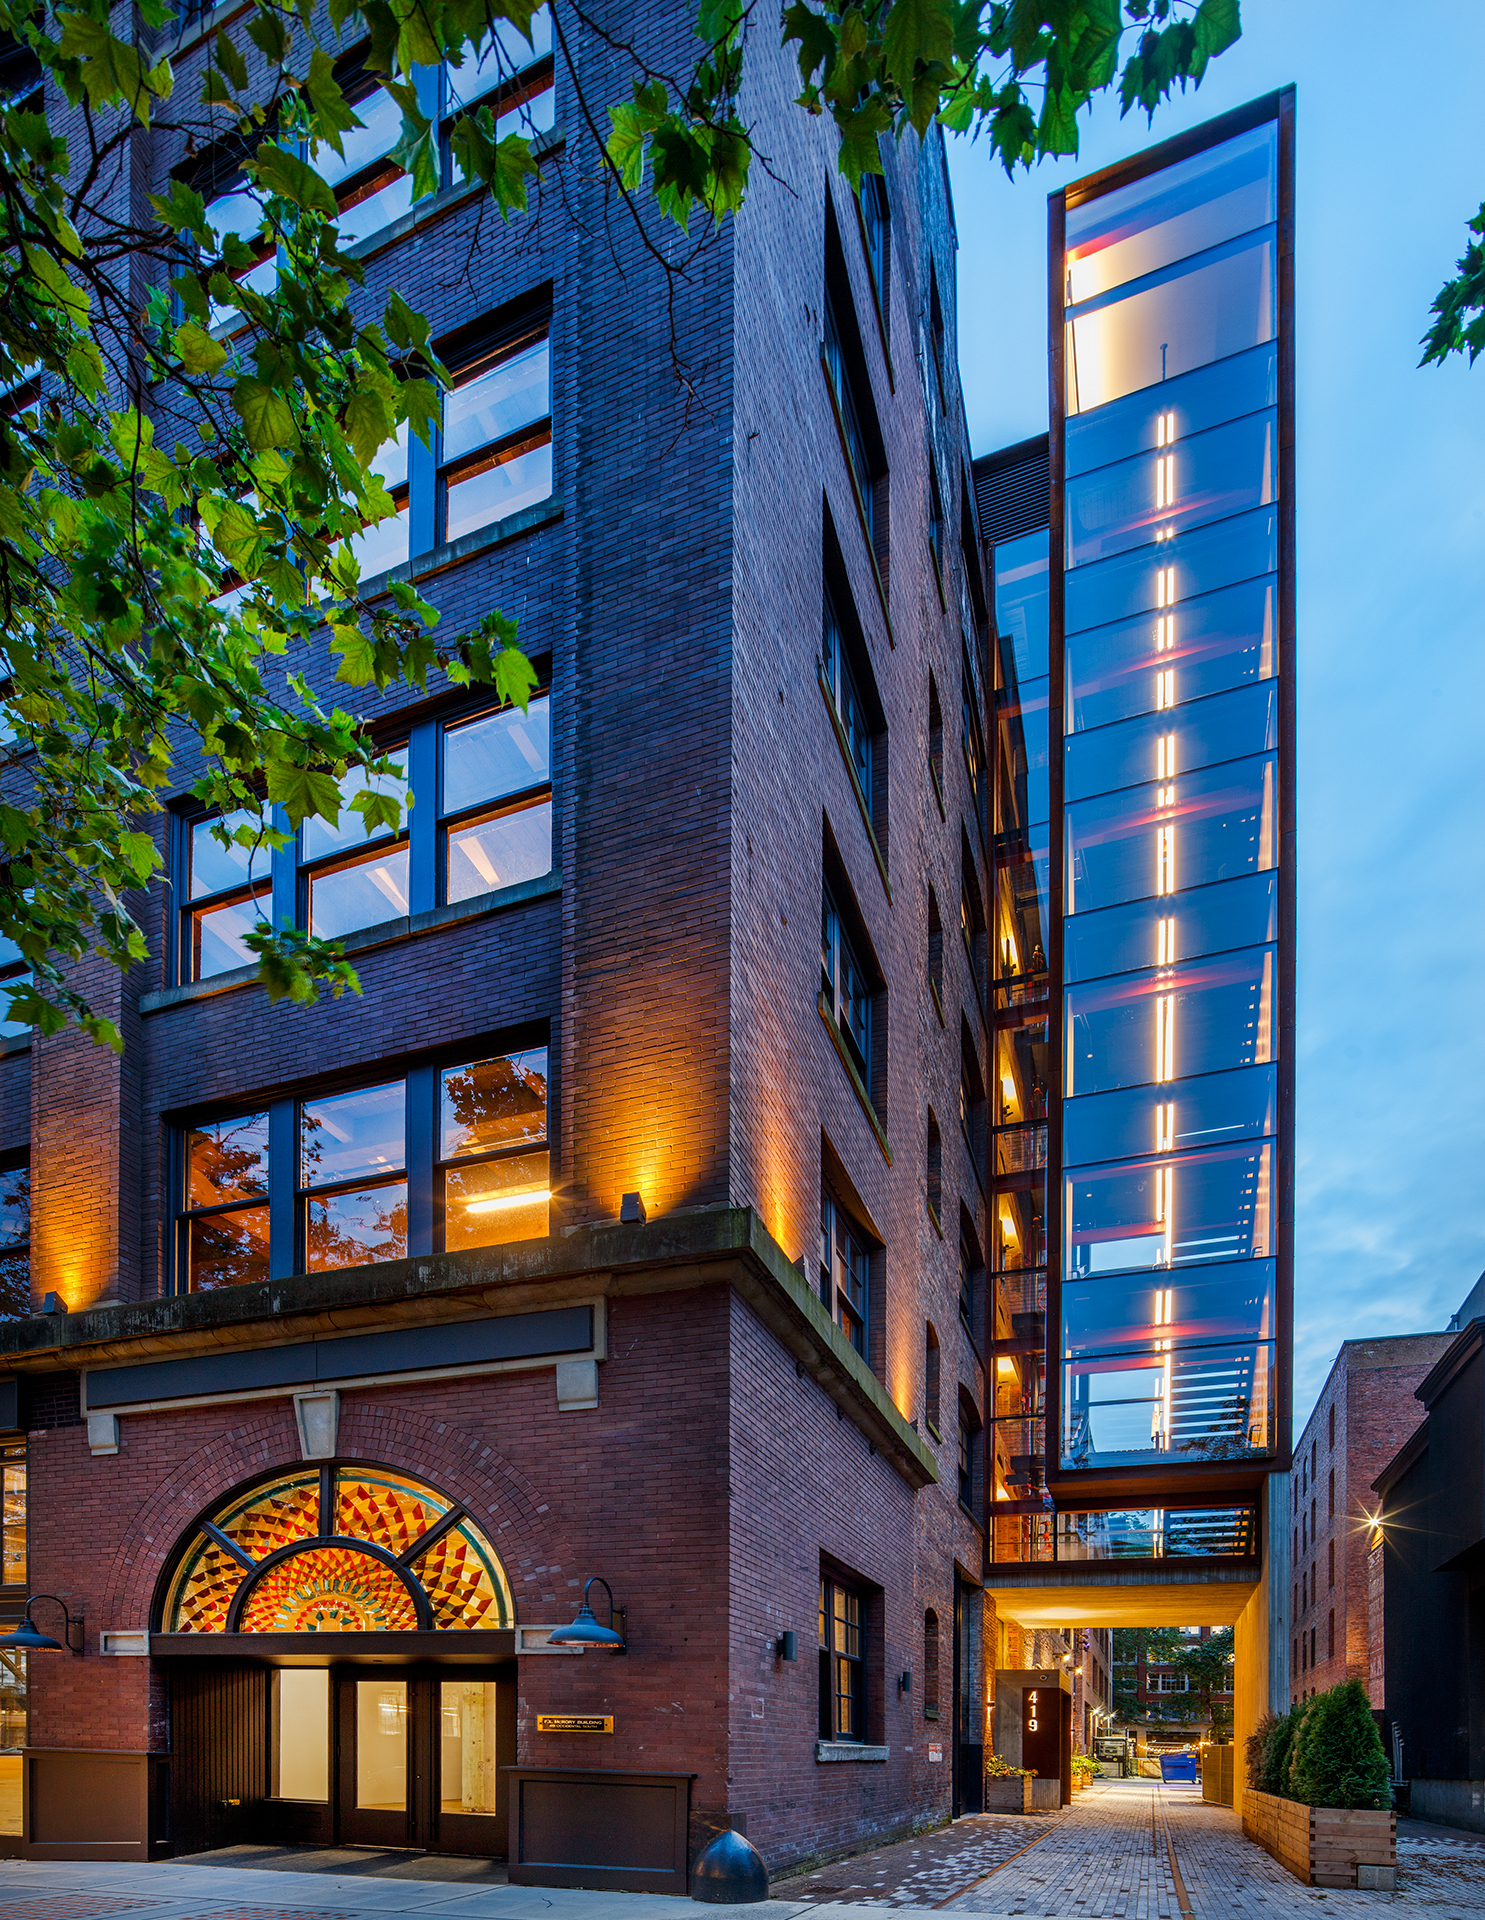 The interior of a modern brick building at twilight.